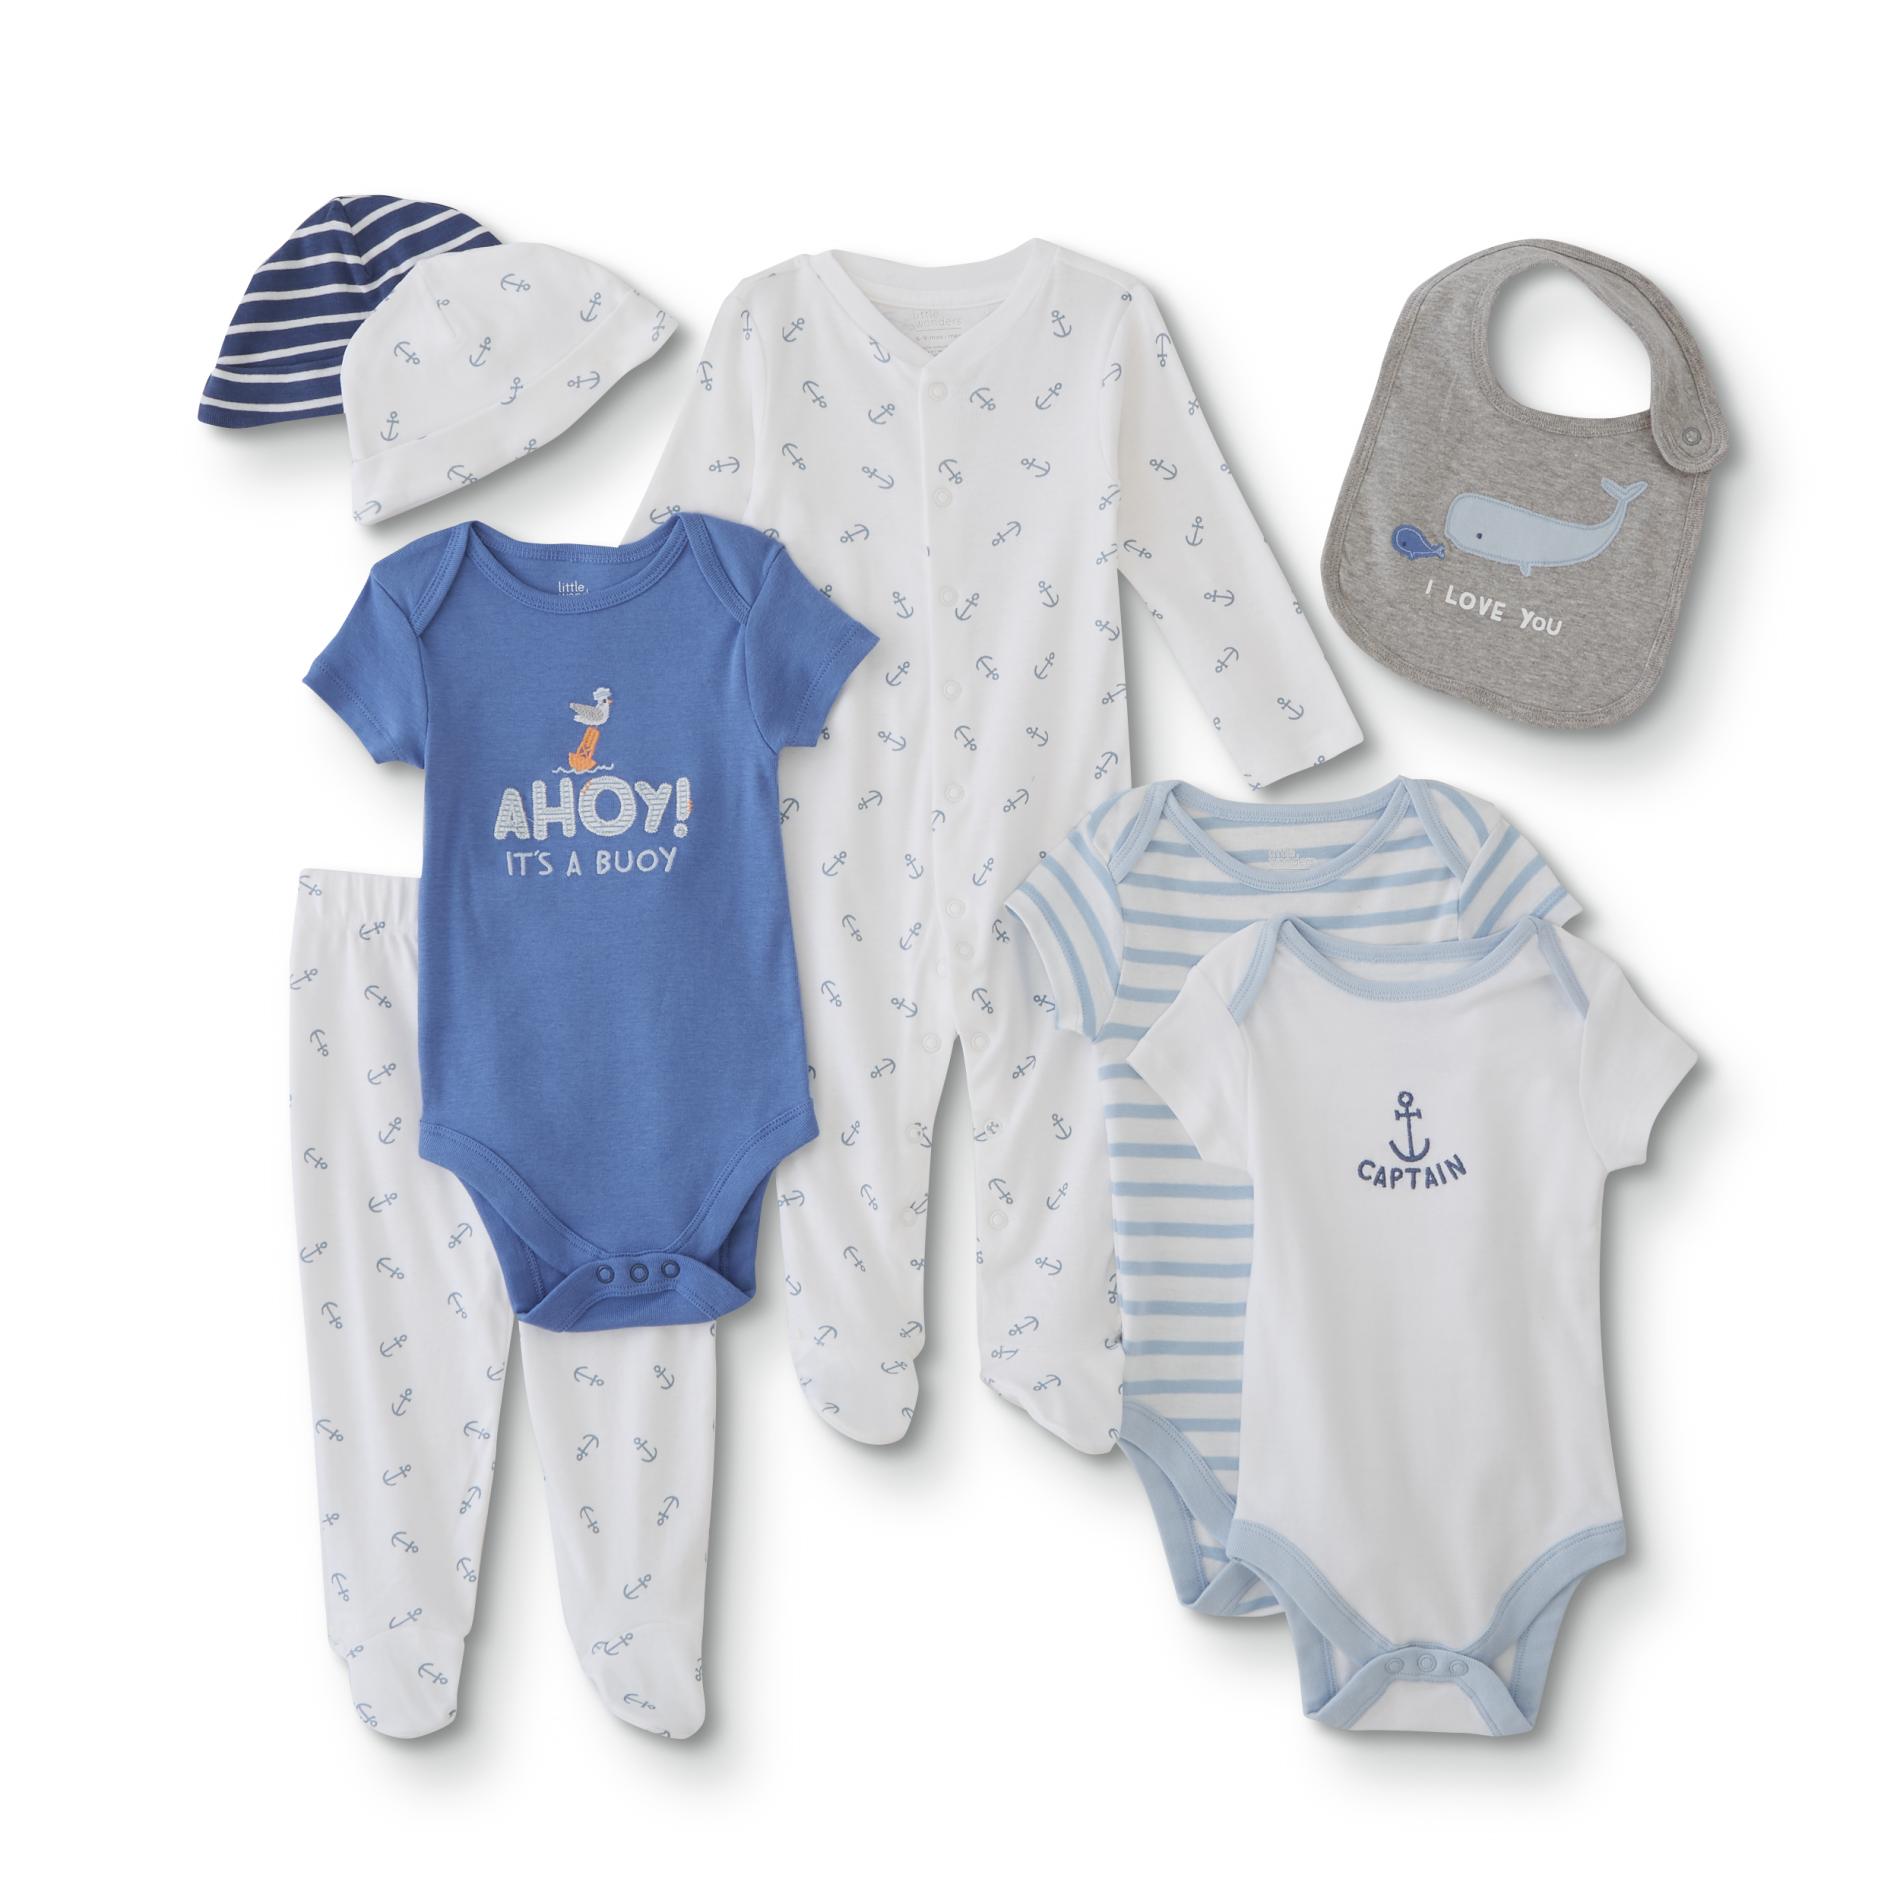 Baby Gifts - Kmart